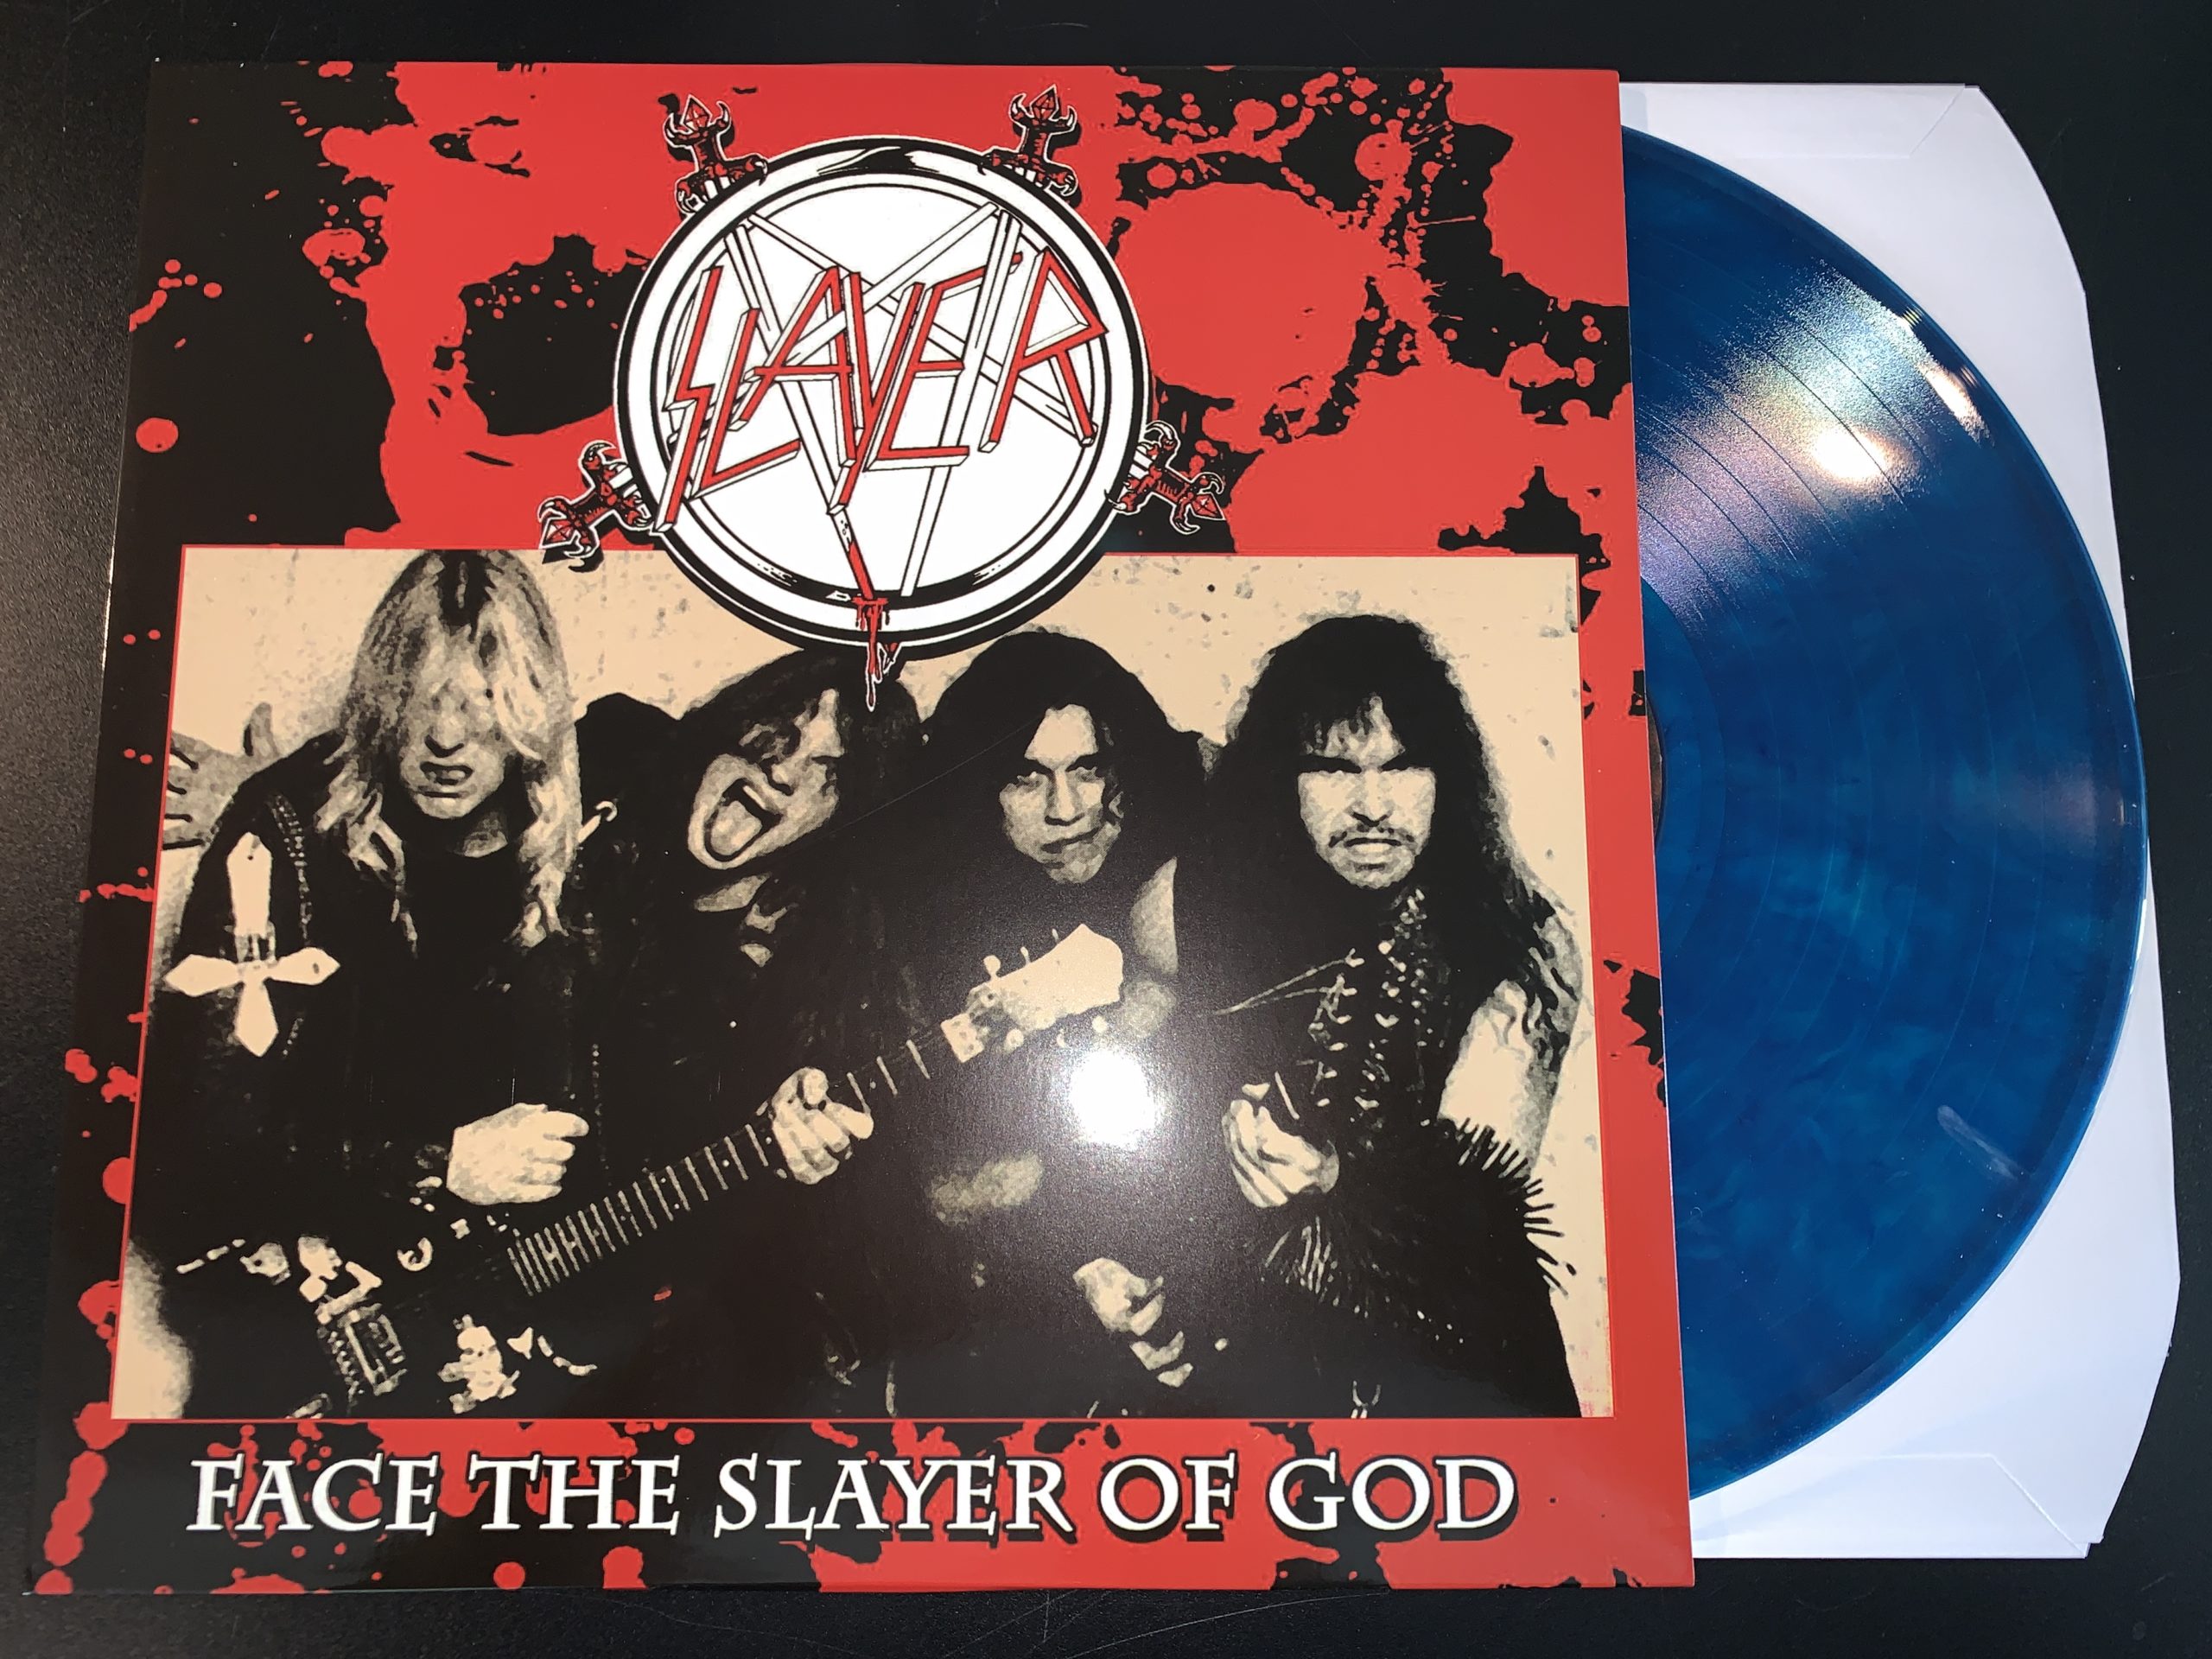 SLAYER, FACE THE SLAYER OF GOD, LIVE NYC 12/29/84, BLUE COLORED VINYL